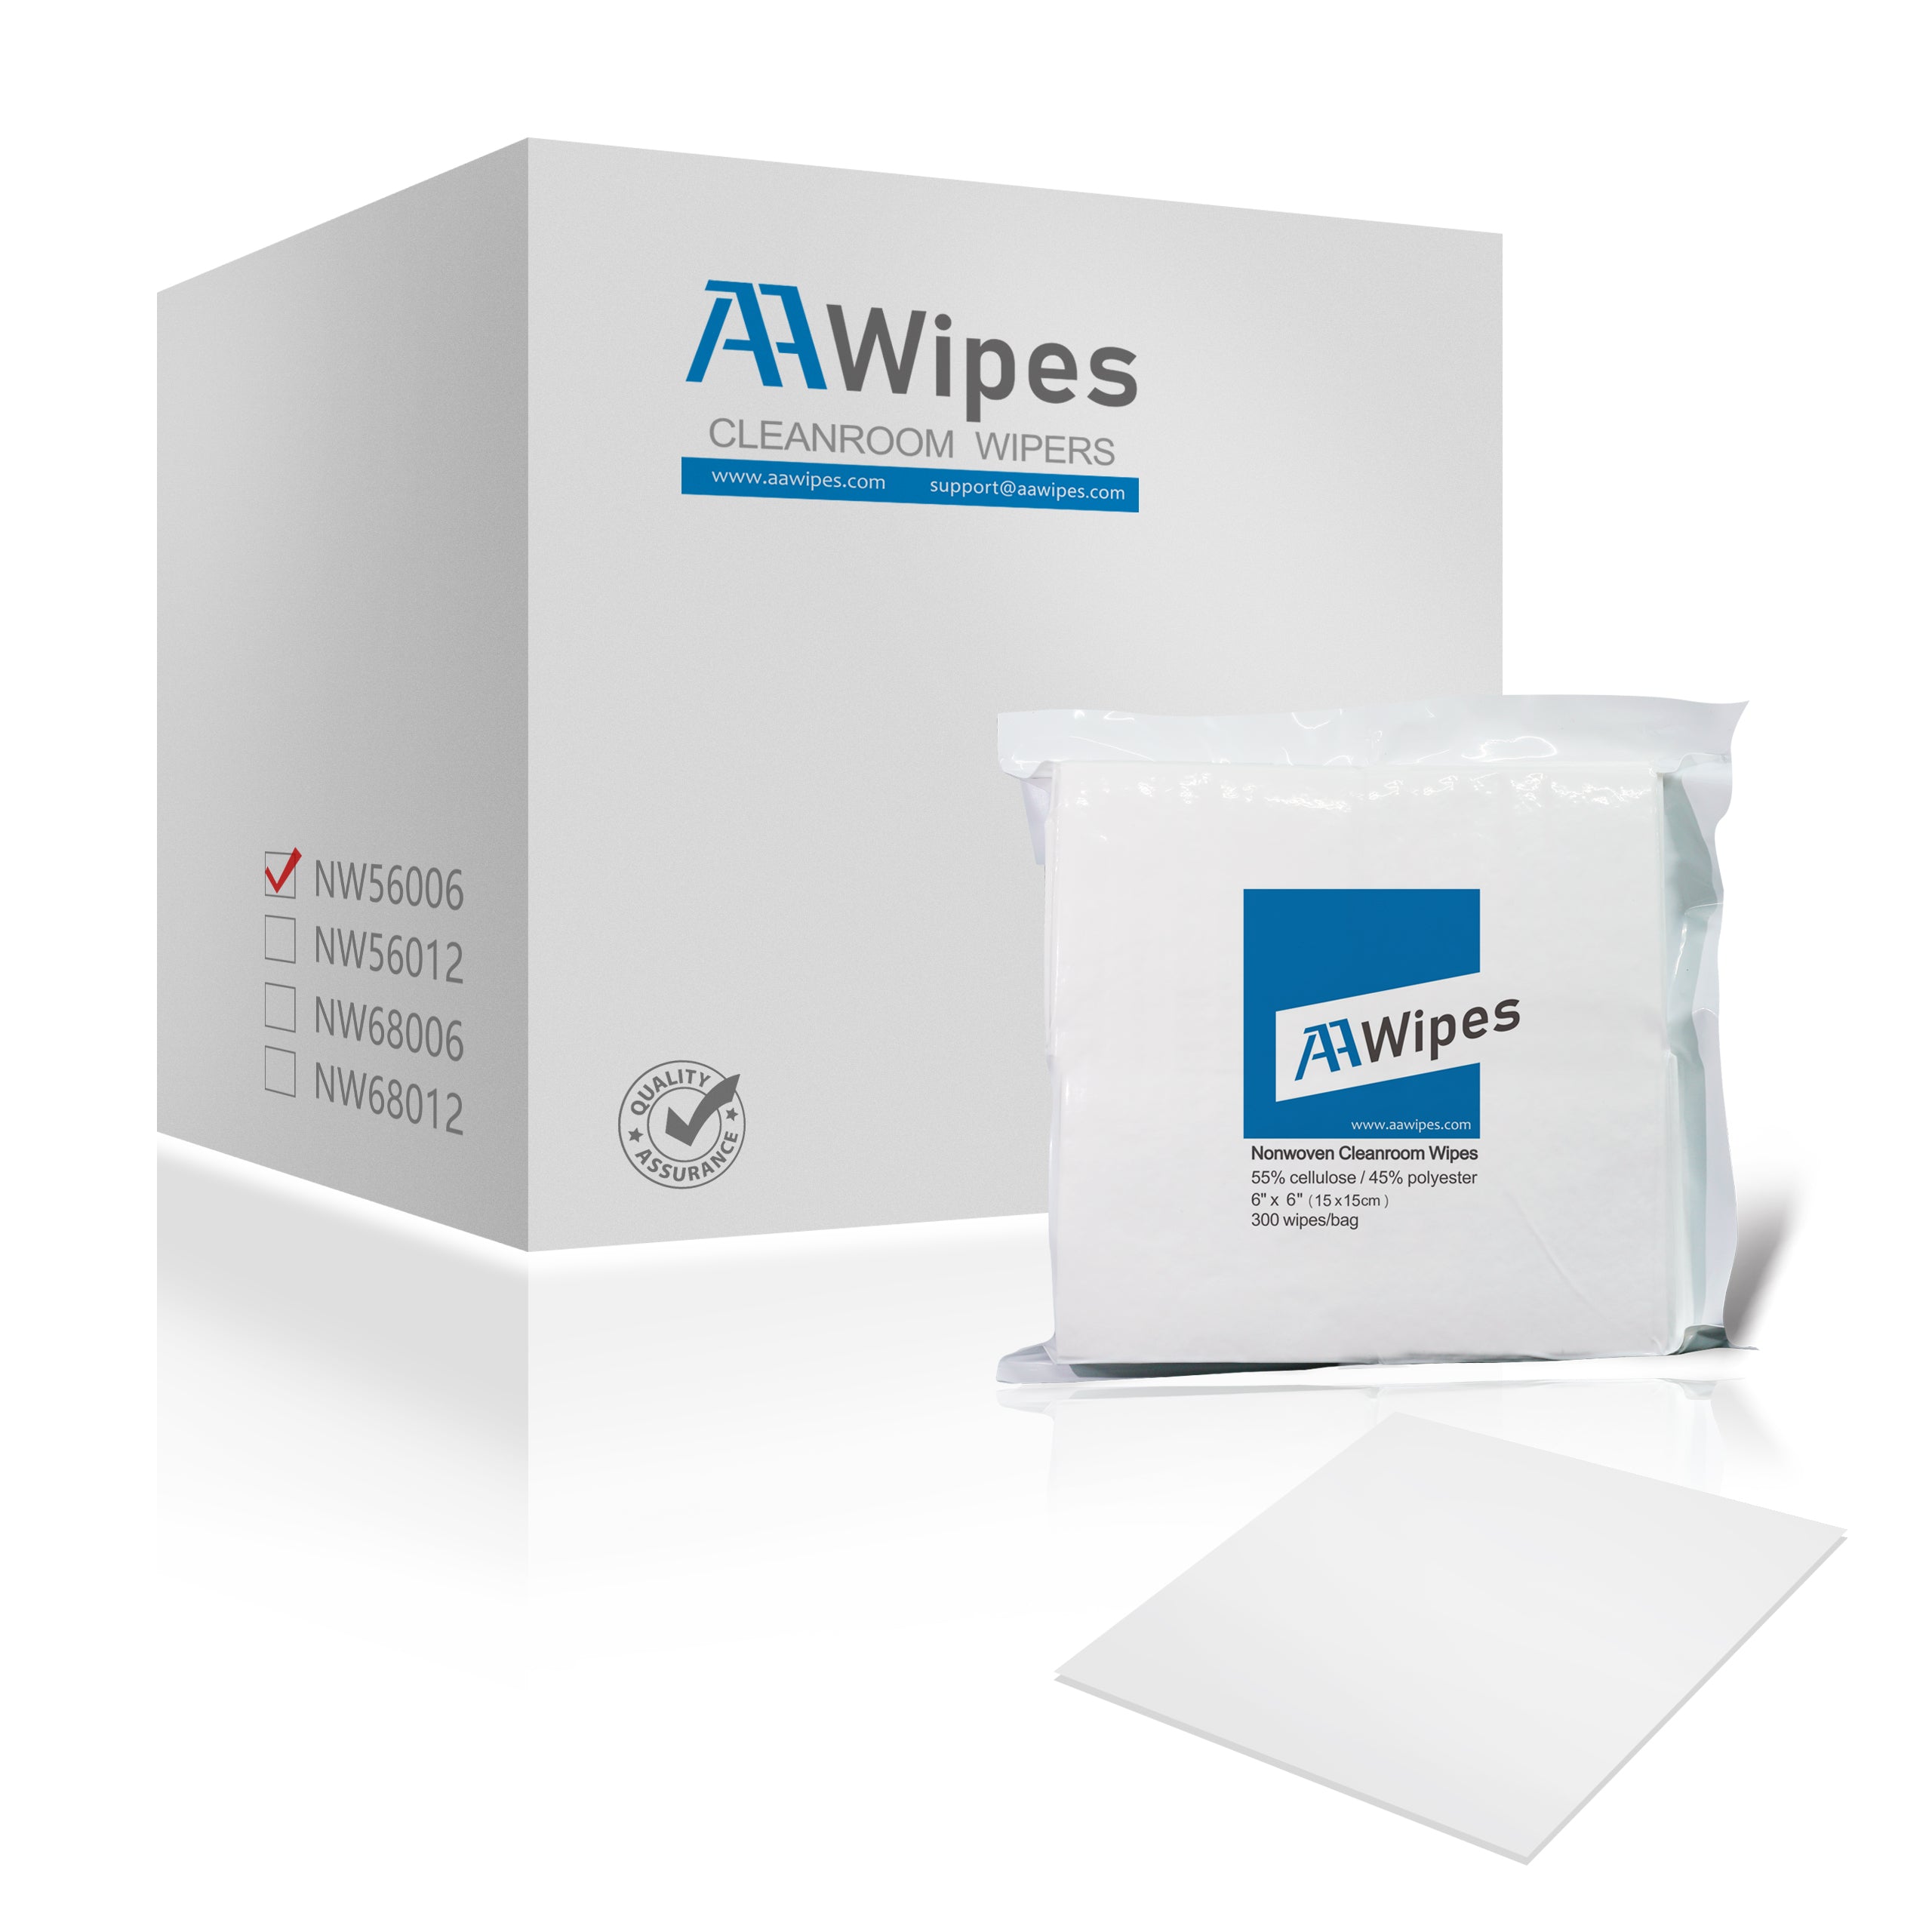 AAwipes have excellent wet and dry strength, superior absorbency for solvents, and resistance to oil, abrasion, and chemicals. They are cost-effective and designed for repeated use in applications where cleanliness is crucial